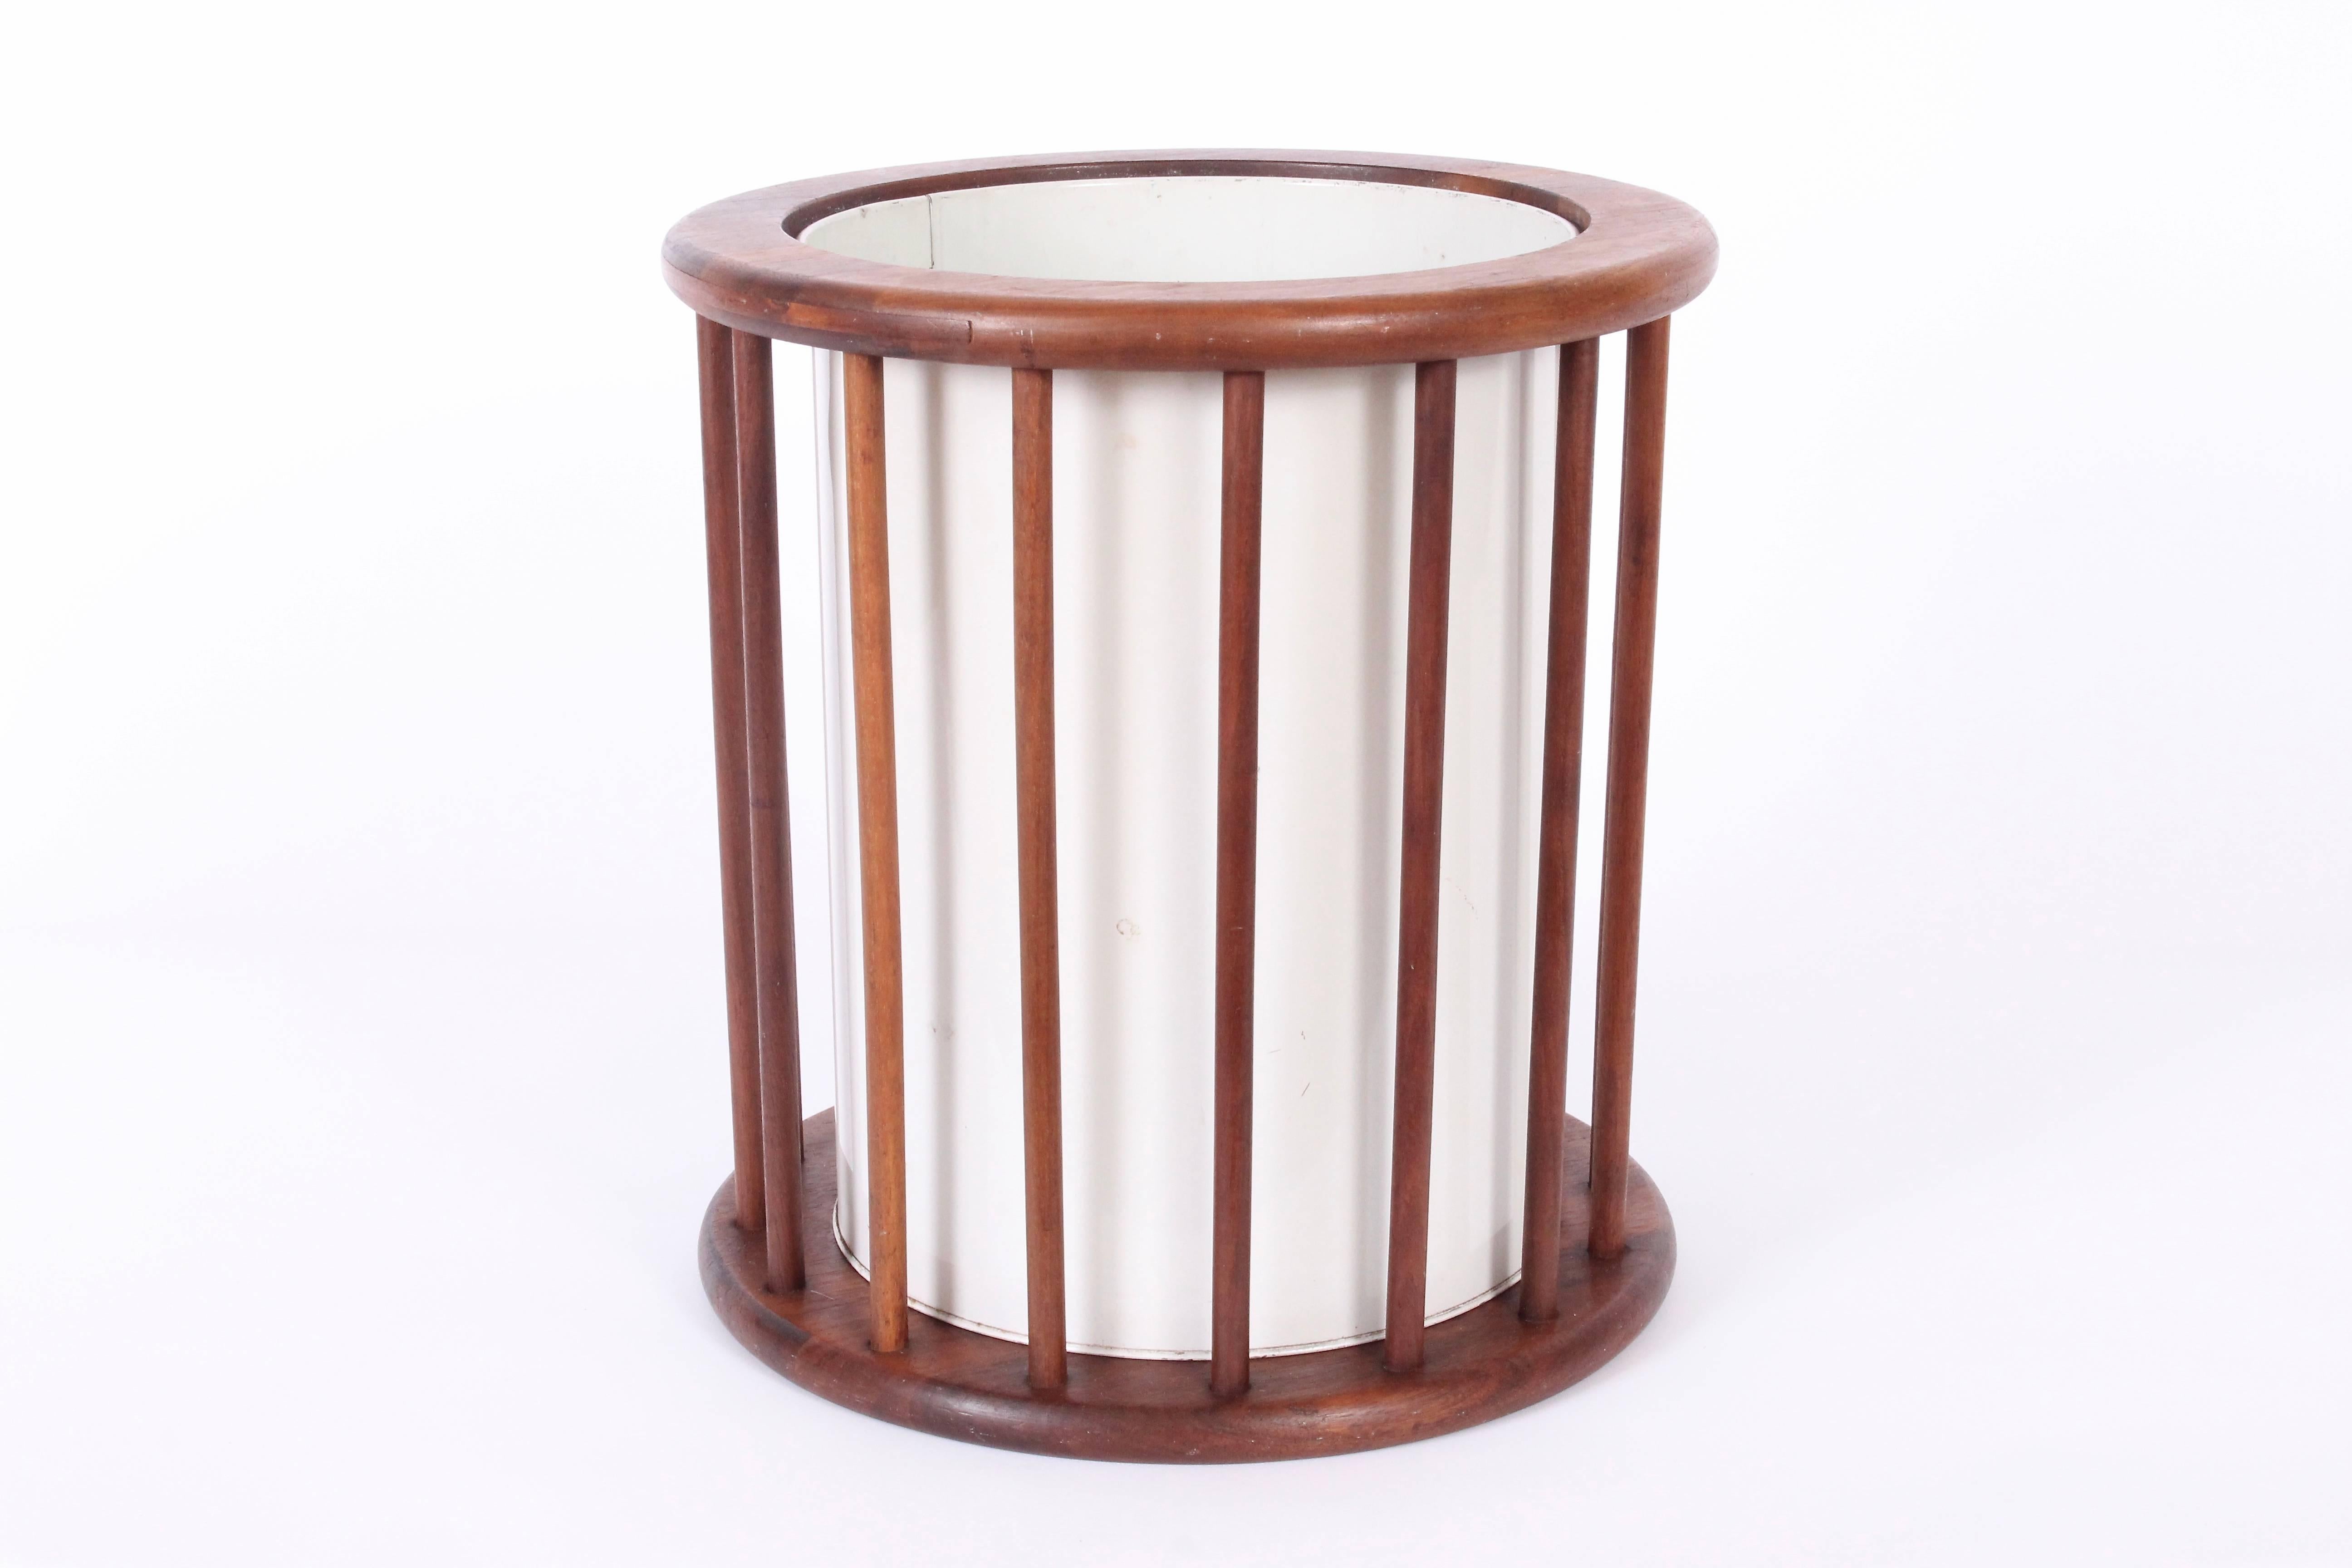 American Mid Century Modern Arthur Umanoff Walnut Spindle Paper Can, Trash Basket. Circular Walnut spindle surround with Off-White enameled liner can for easy removal. Original condition. Metal container 9D. Versatile. Sculptural. Rarity. 
